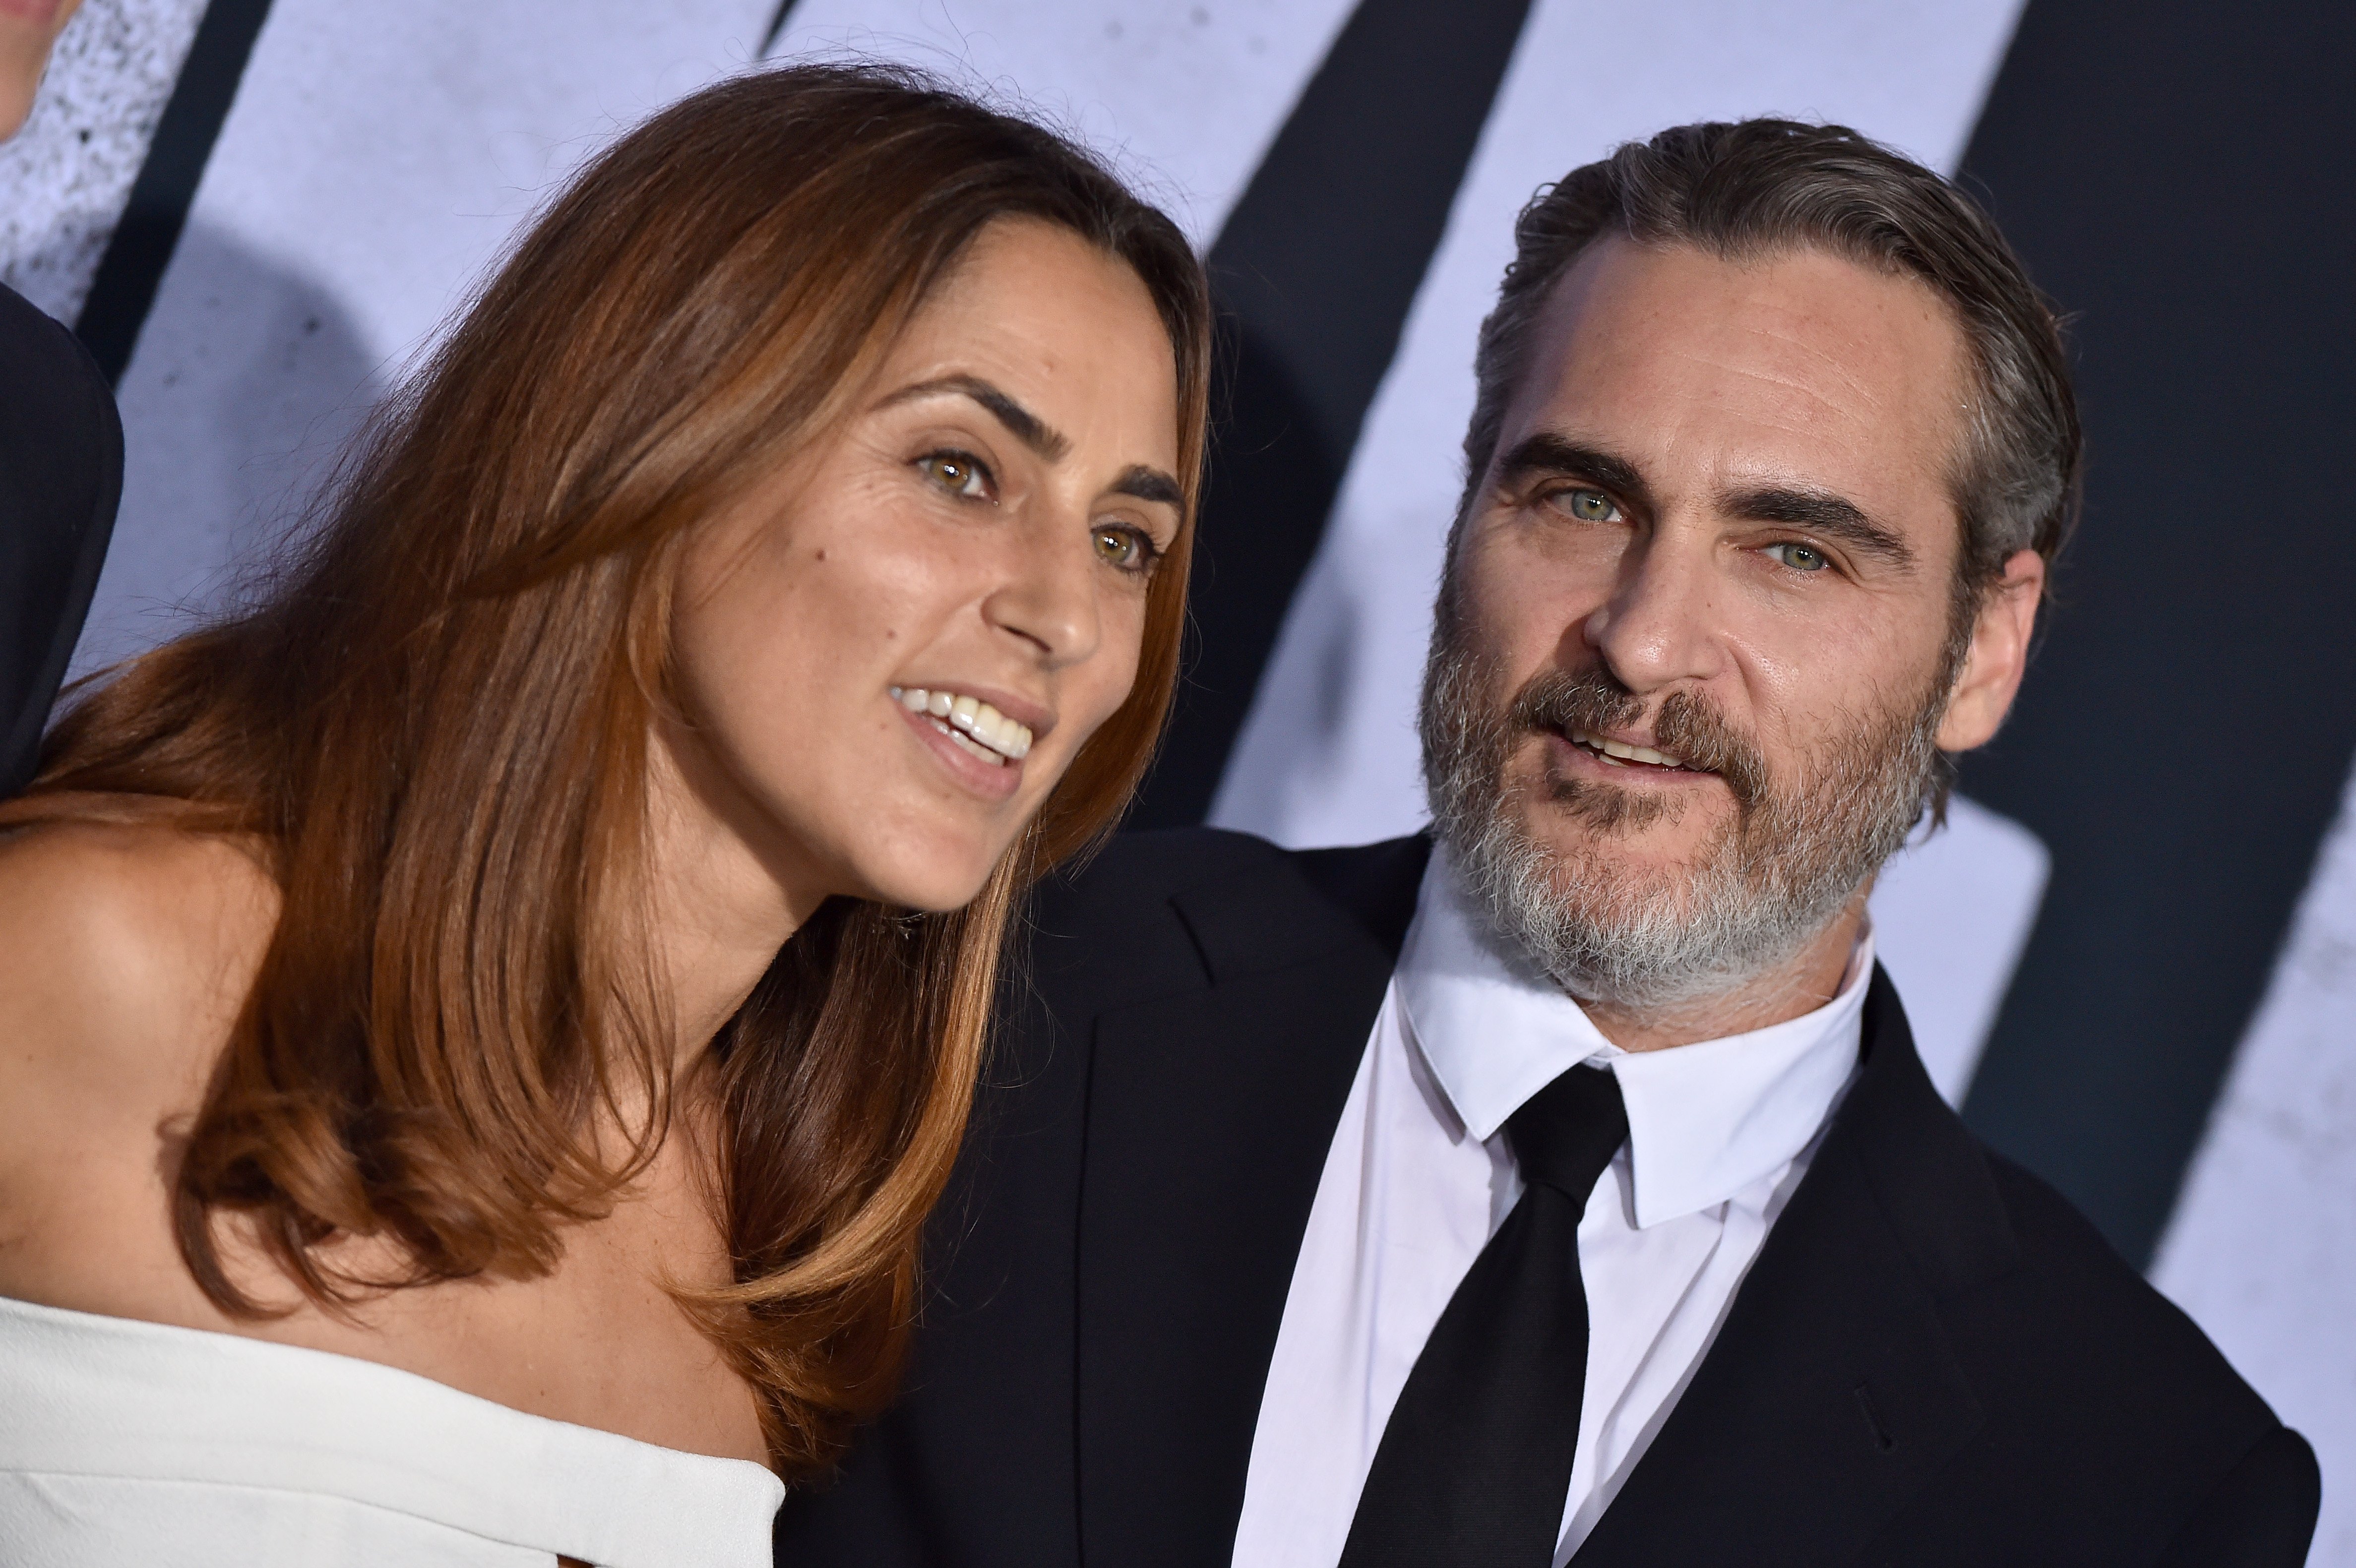 Summer Phoenix and Joaquin Phoenix attend the Premiere of Warner Bros Pictures “Joker” on September 28, 2019, in Hollywood, California. | Source: Getty Images